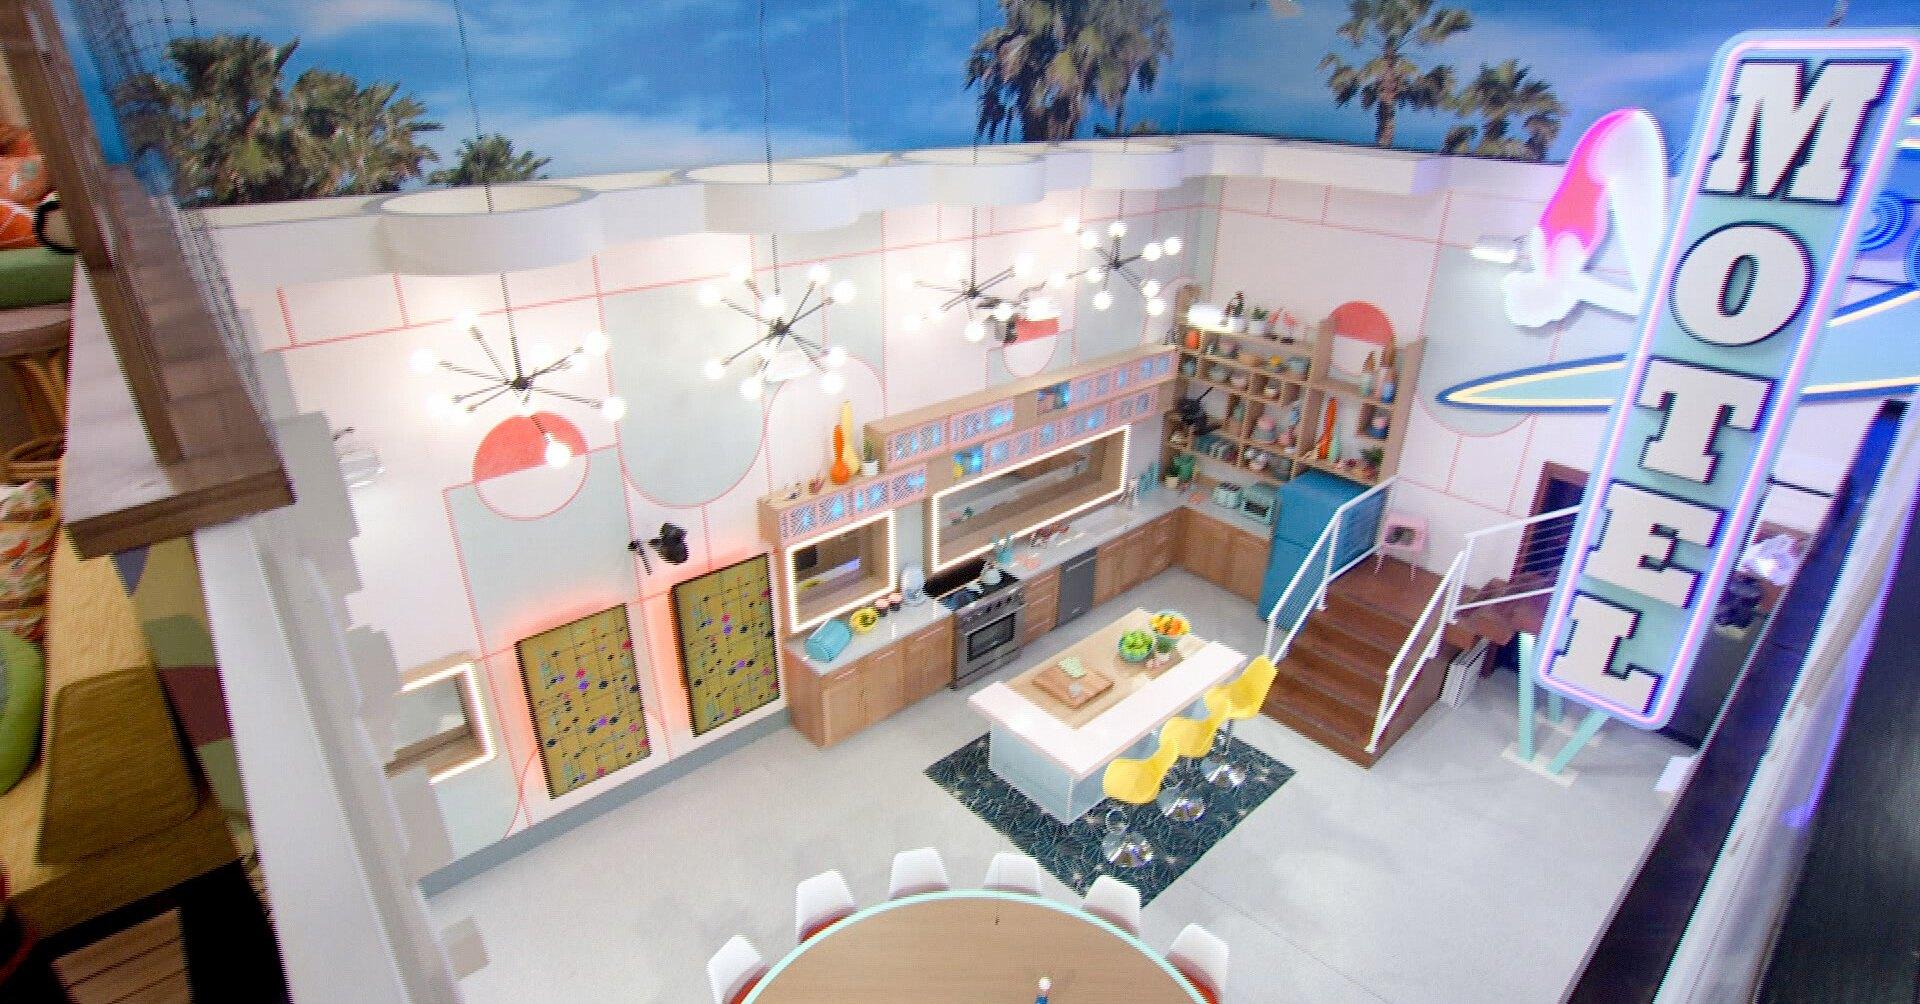 You'll Never Guess Where 'Big Brother' Is *Actually* Filmed 3tdesign